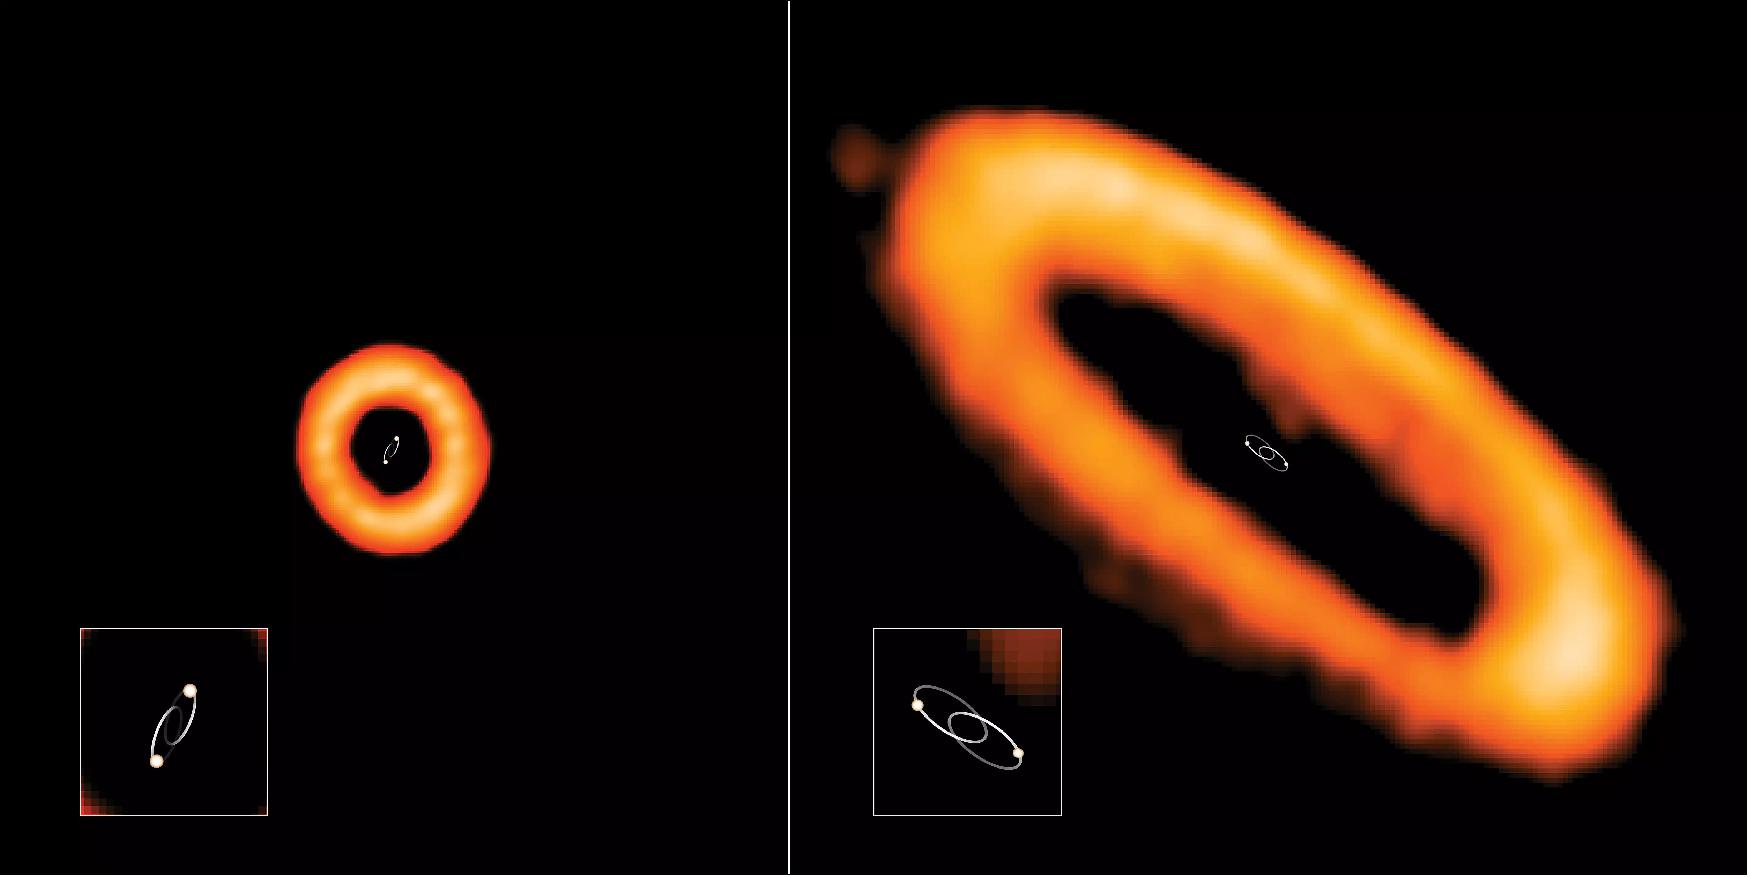 Figure 66: Two examples of aligned and misaligned protoplanetary disks around binary stars (circumbinary disks), observed with ALMA. Binary star orbits are added for clarity. Left: in star system HD 98800 B, the disk is misaligned with inner binary stars. The stars are orbiting each other (in this view, towards and away from us) in 315 days. Right: in star system AK Sco, the disk is in line with the orbit of its binary stars. The stars are orbiting each other in 13.6 days [image credit: ALMA (ESO/NAOJ/NRAO), I. Czekala and G. Kennedy; NRAO/AUI/NSF, S. Dagnello]